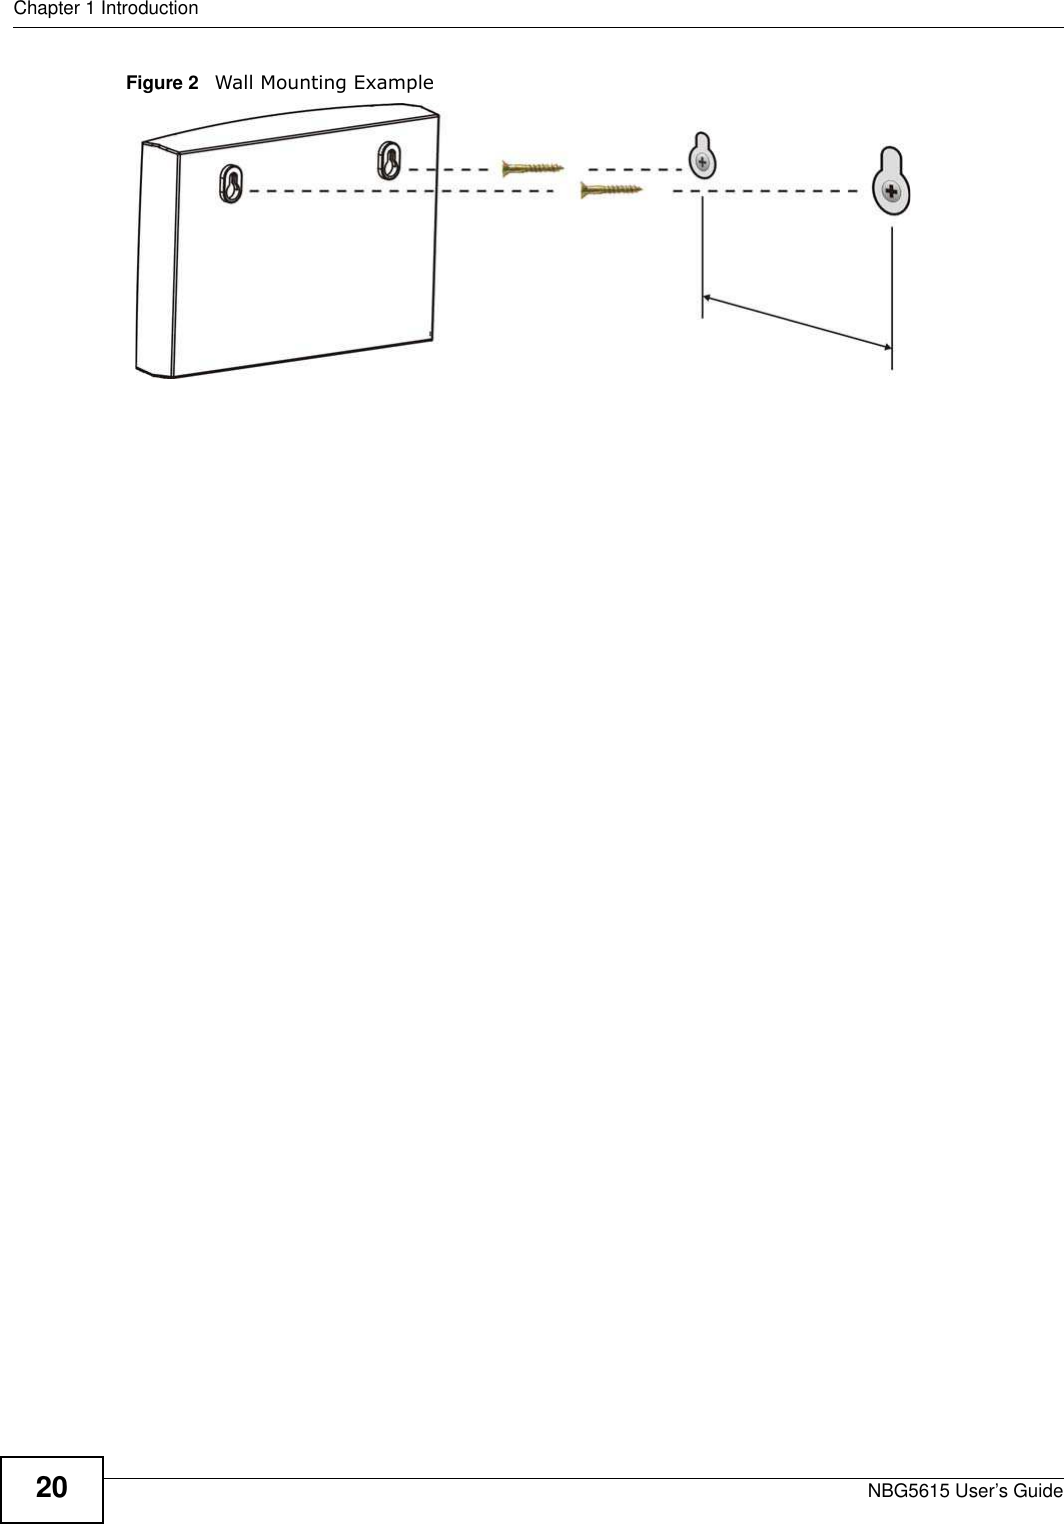 Chapter 1 IntroductionNBG5615 User’s Guide20Figure 2   Wall Mounting Example